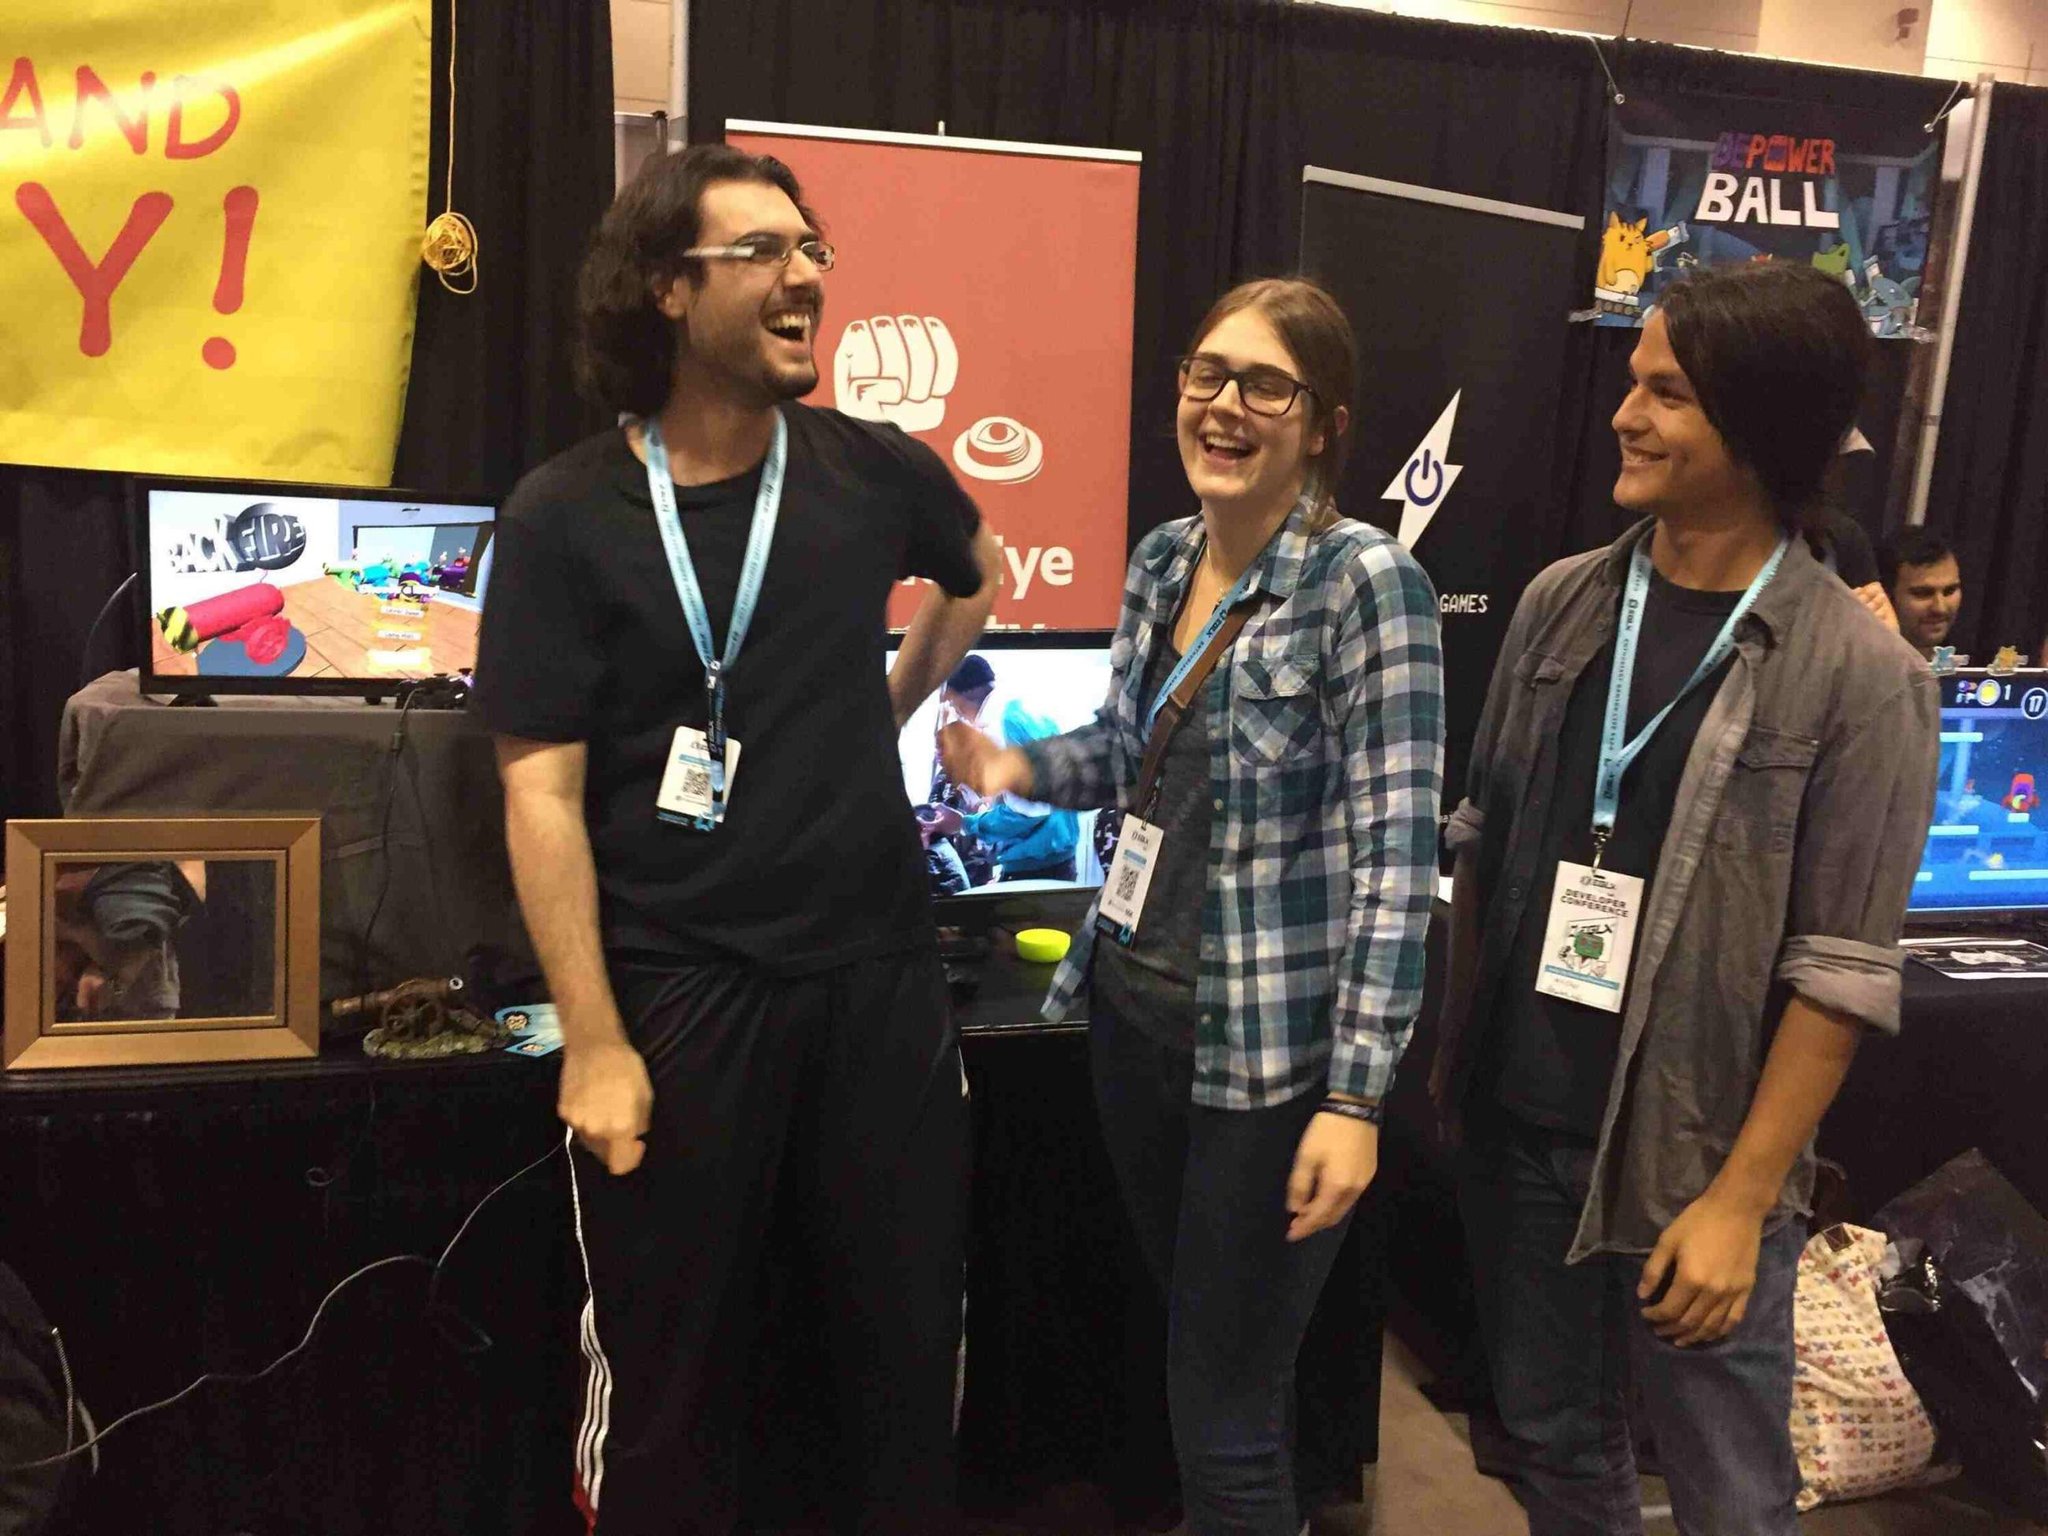 The Backfire team laughing at what we can only assume was a clever joke